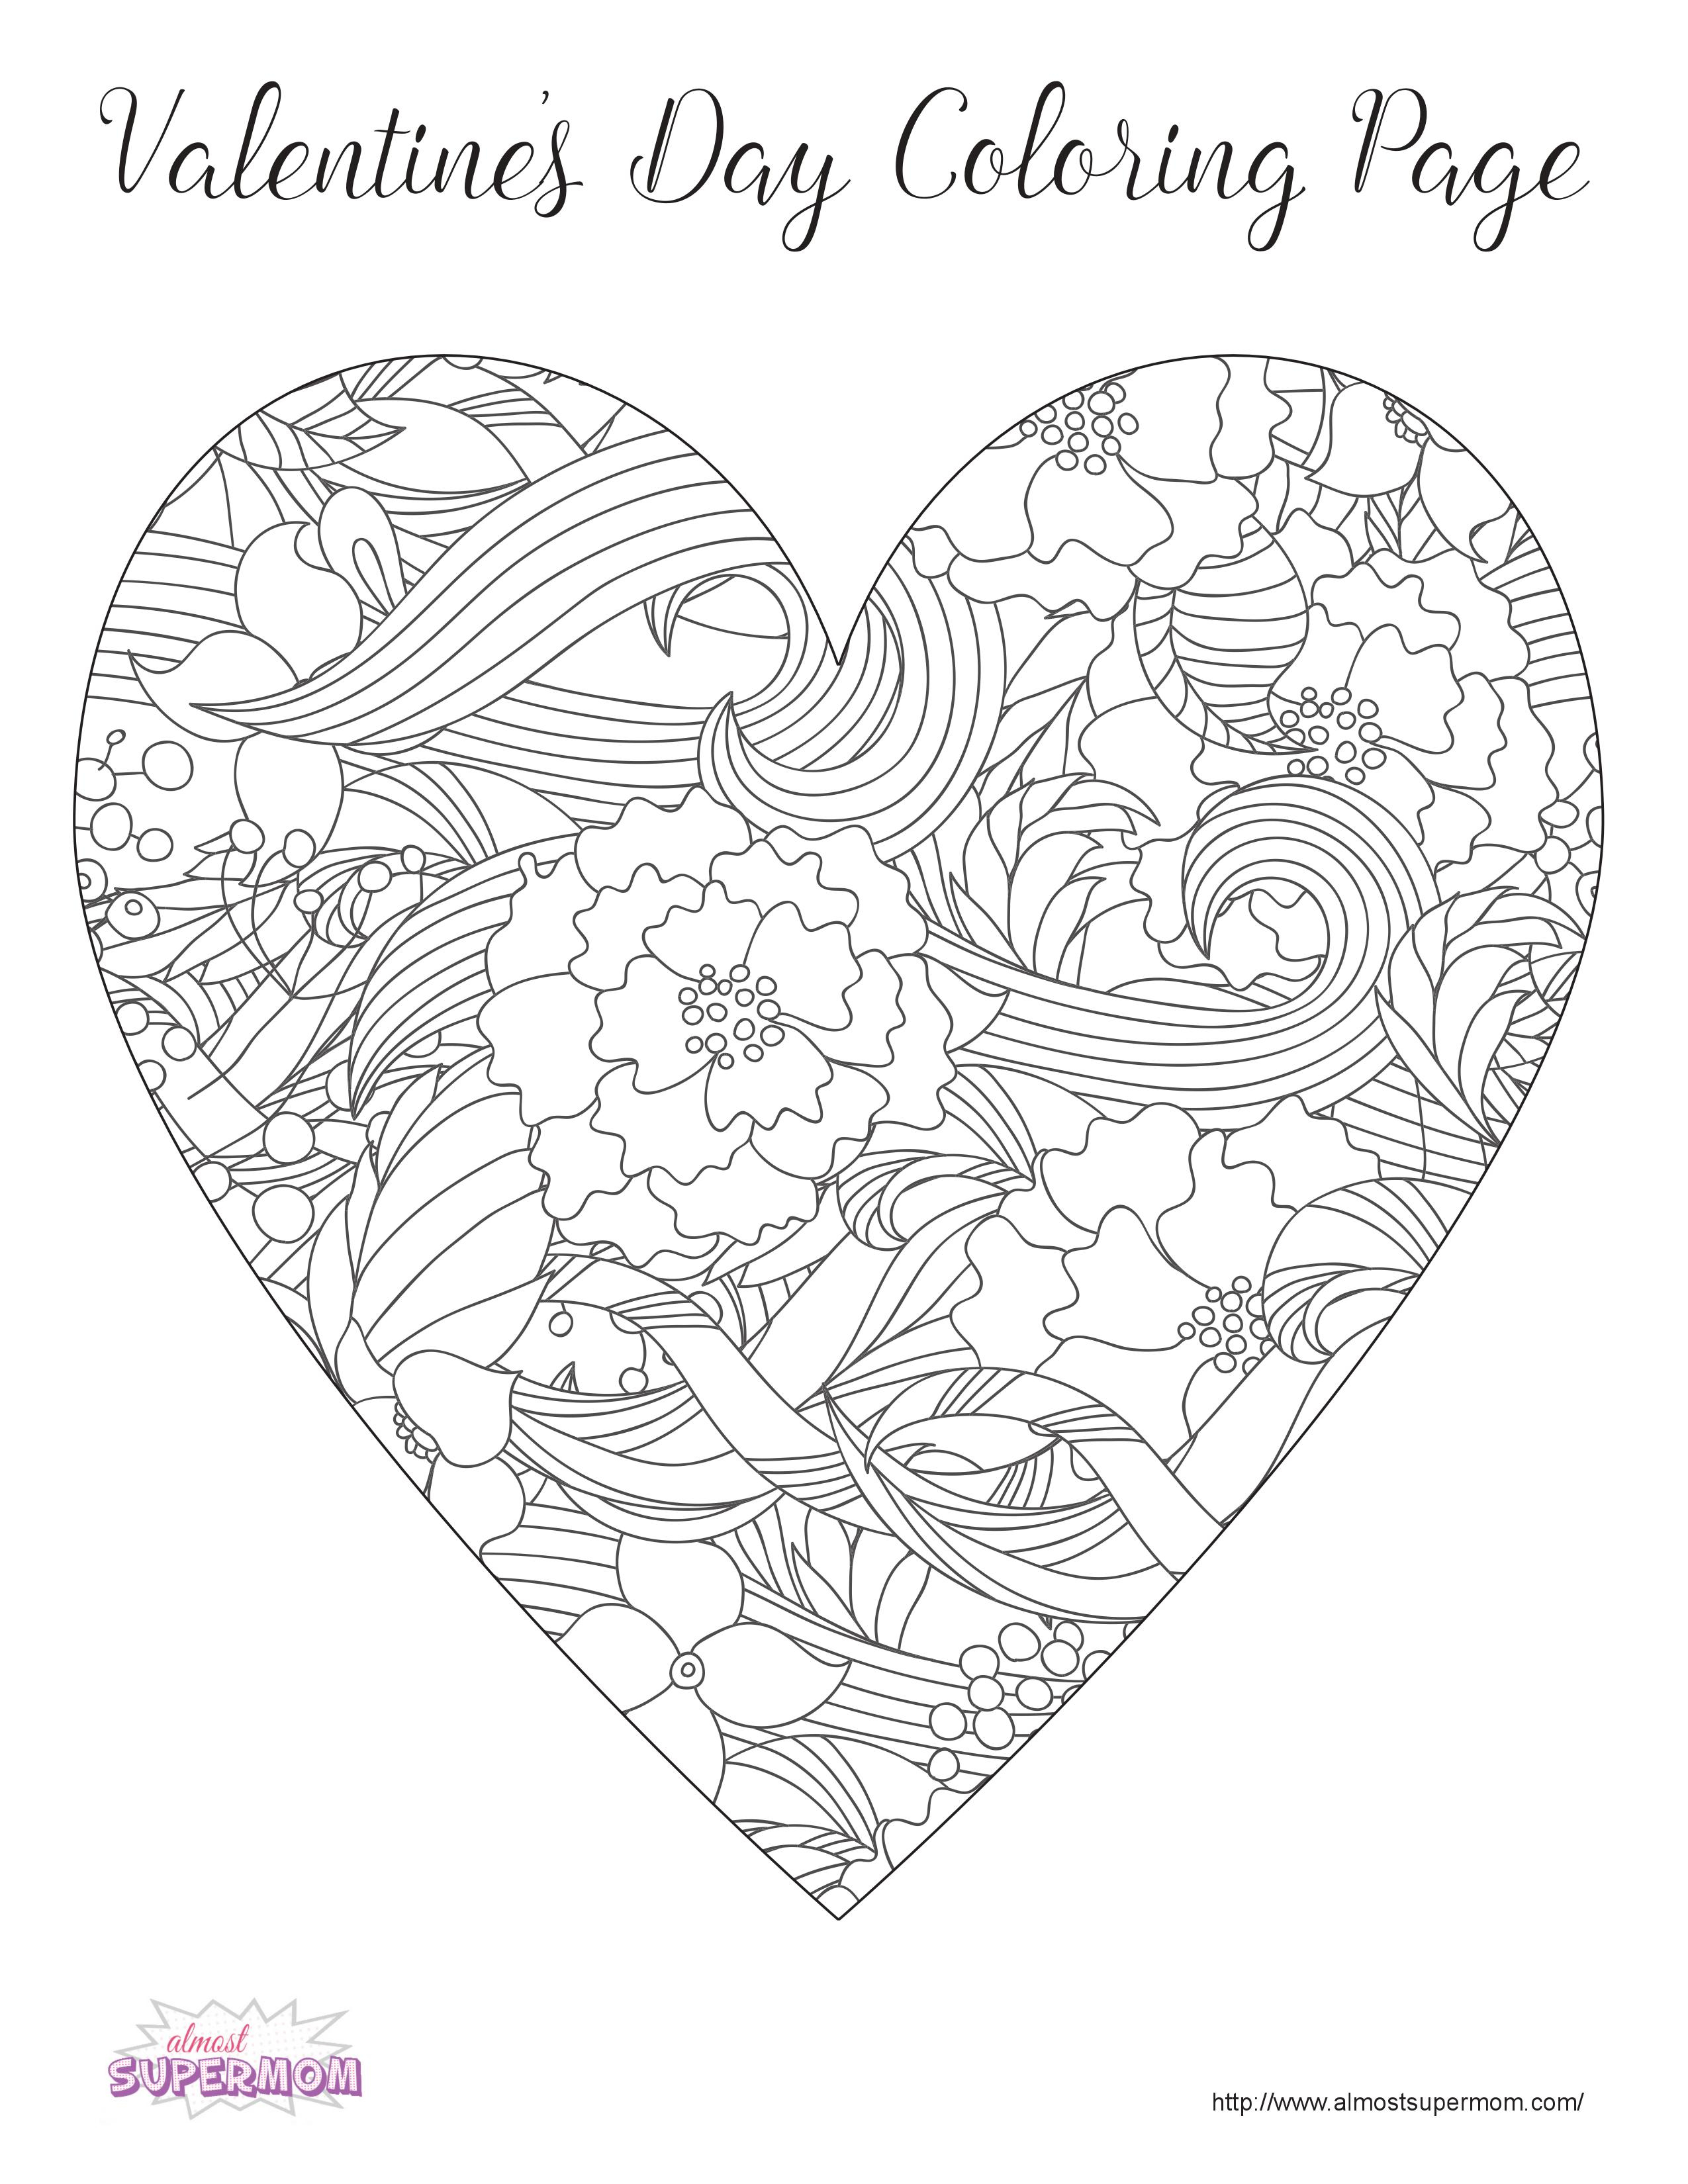 Valentine Coloring Page Coloring Ideas Coloring Pages Of Valentines Day Staggering Ideas